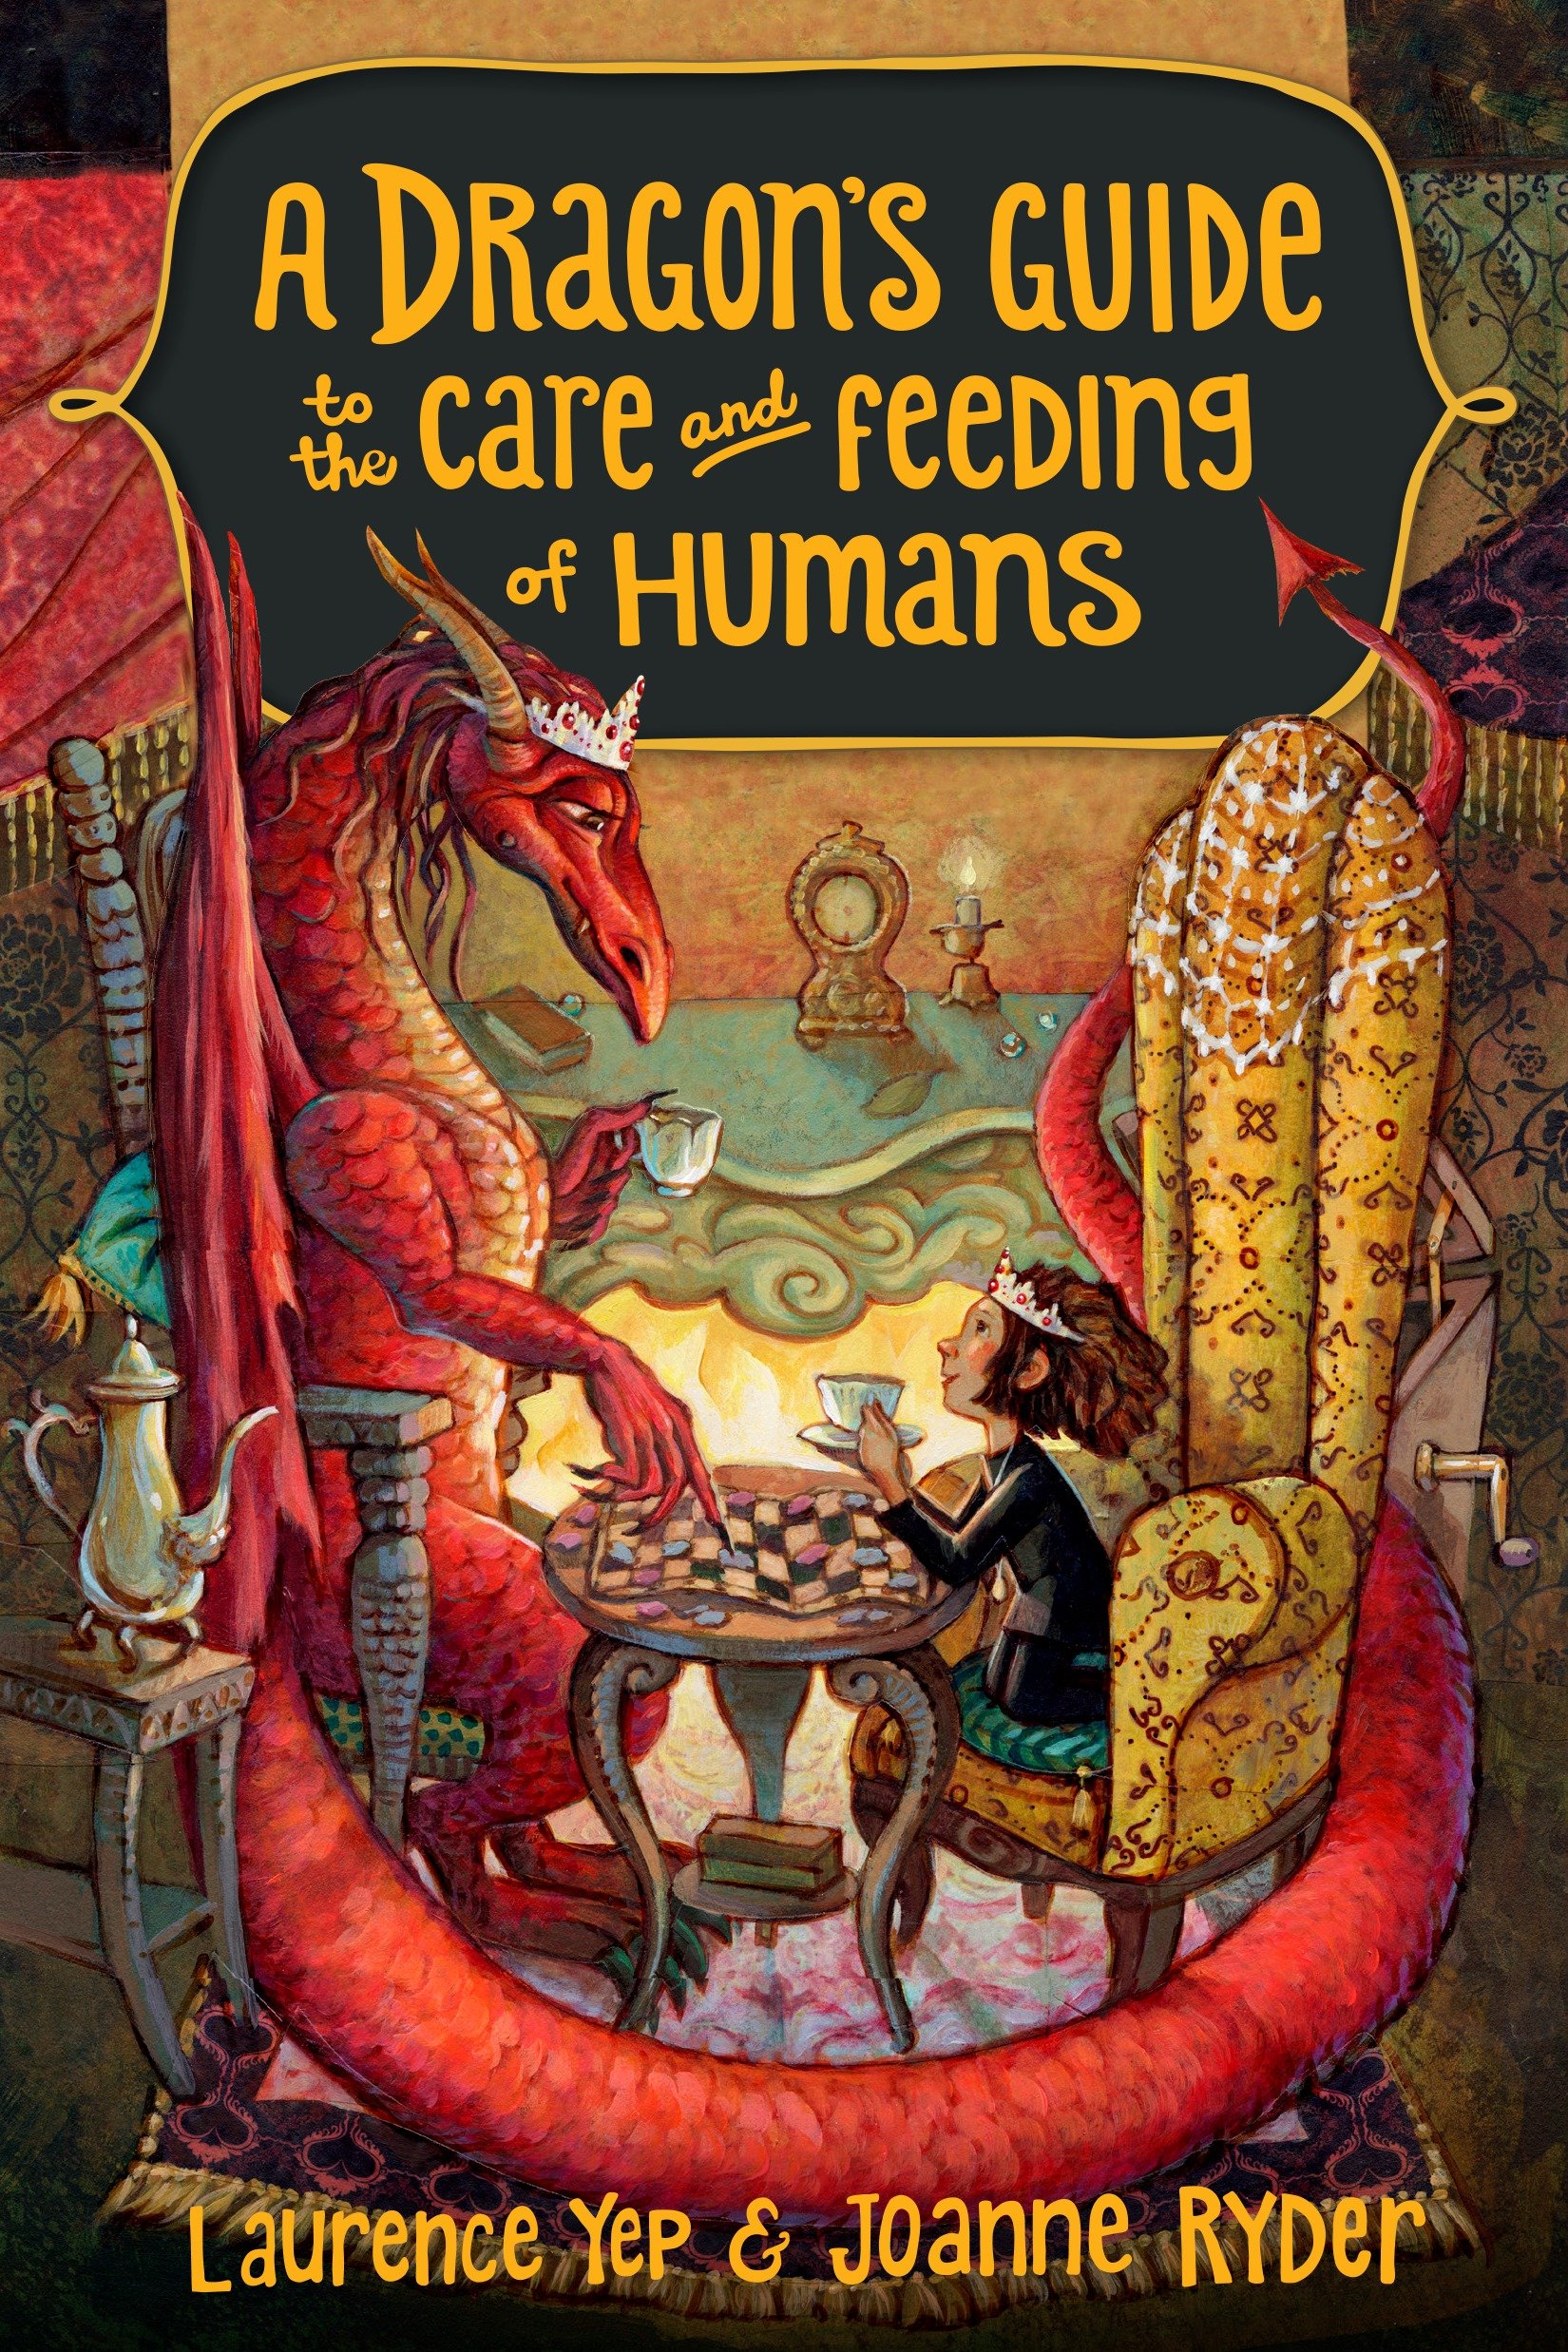 A Dragon's Guide Volume 1 To the Care and Feeding of Humans